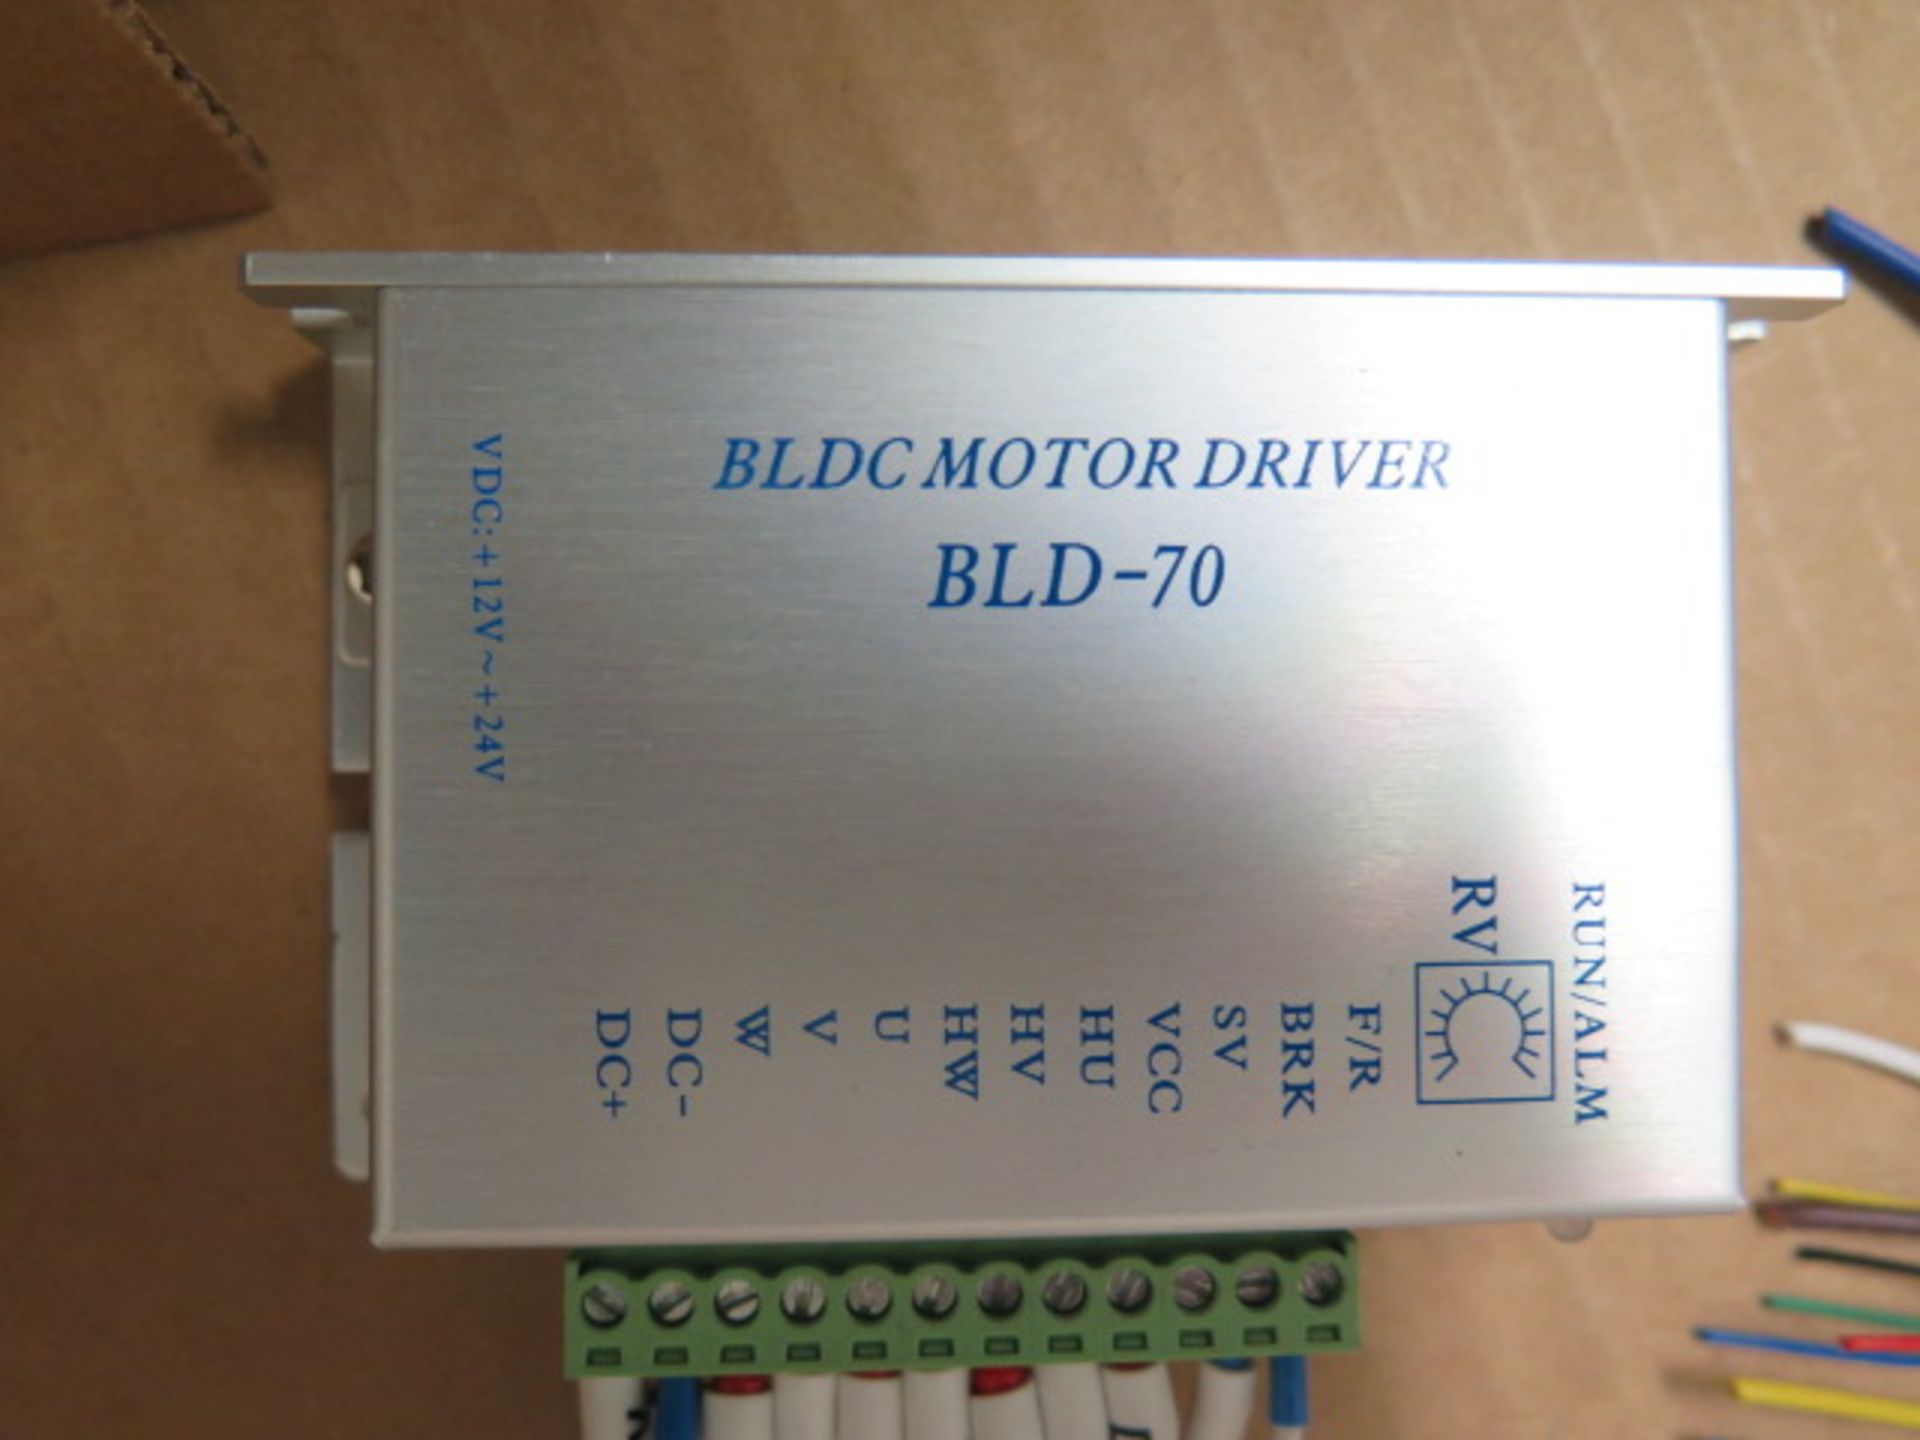 RV mdl. BLD-70 DC Motor Drivers (4) (SOLD AS-IS - NO WARRANTY) - Image 5 of 5